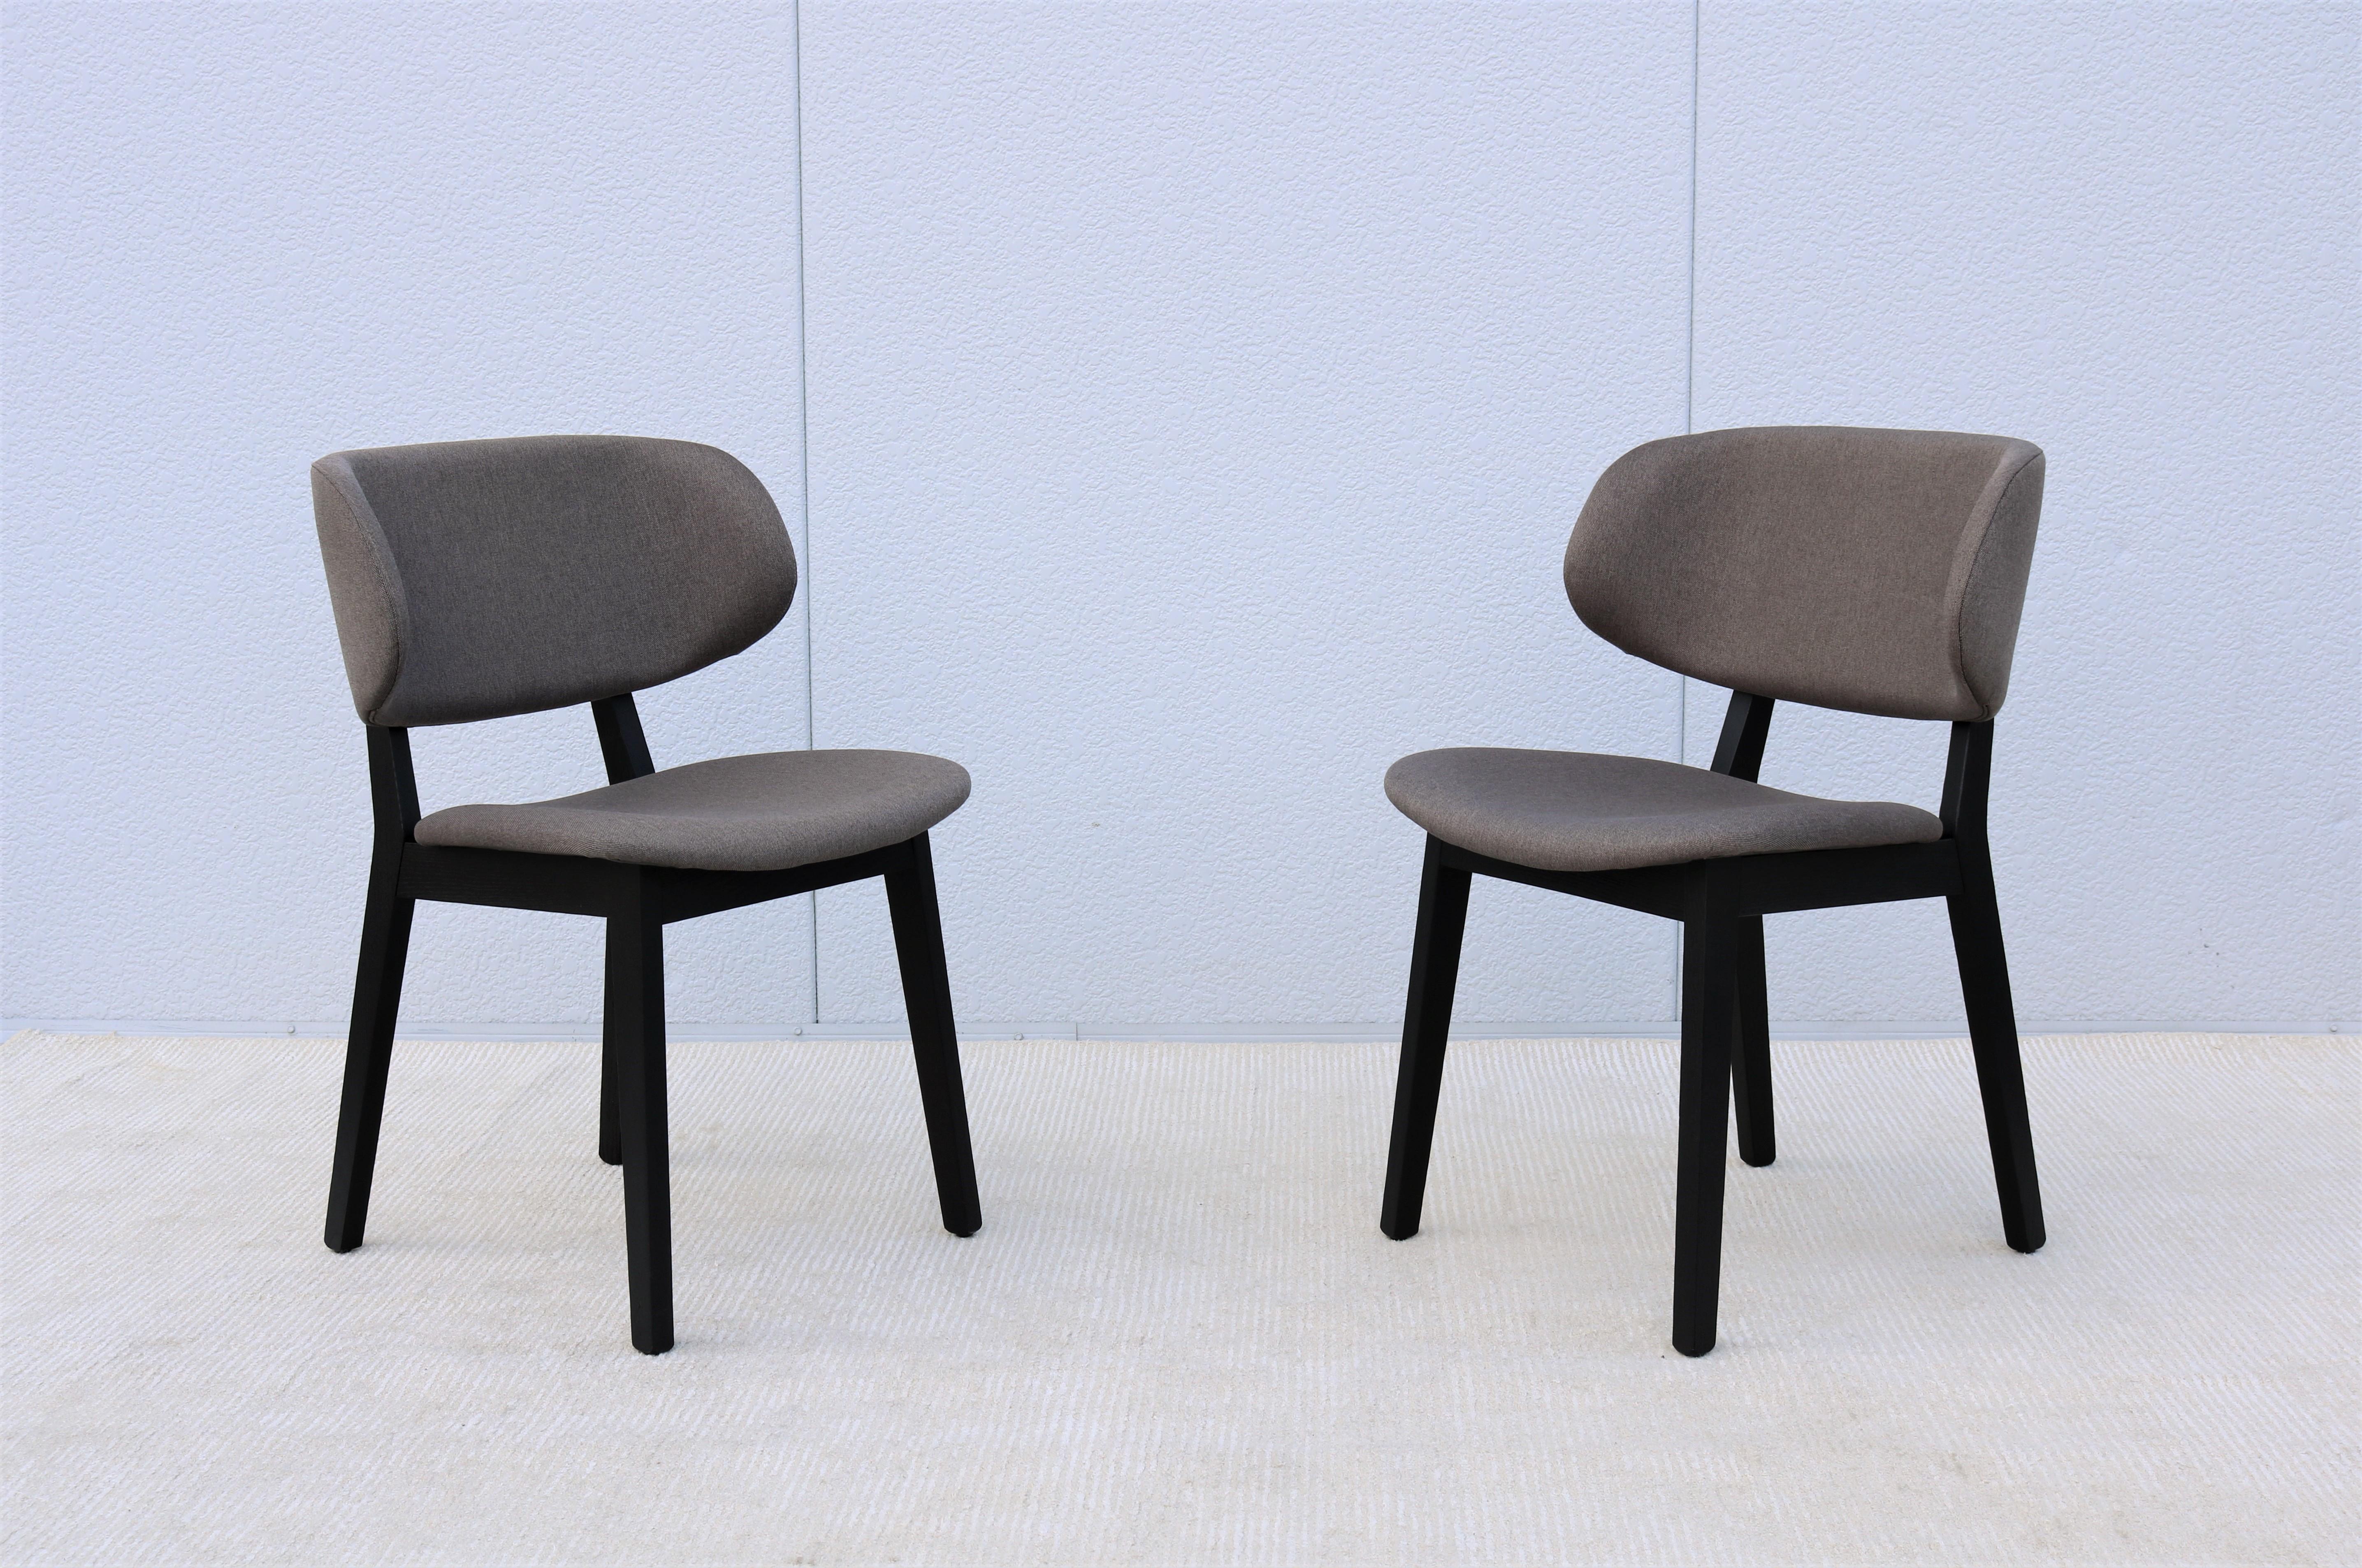 Fabric Scandinavian Style Calligaris Claire Dining Chair Made in Italy, 3 Available For Sale